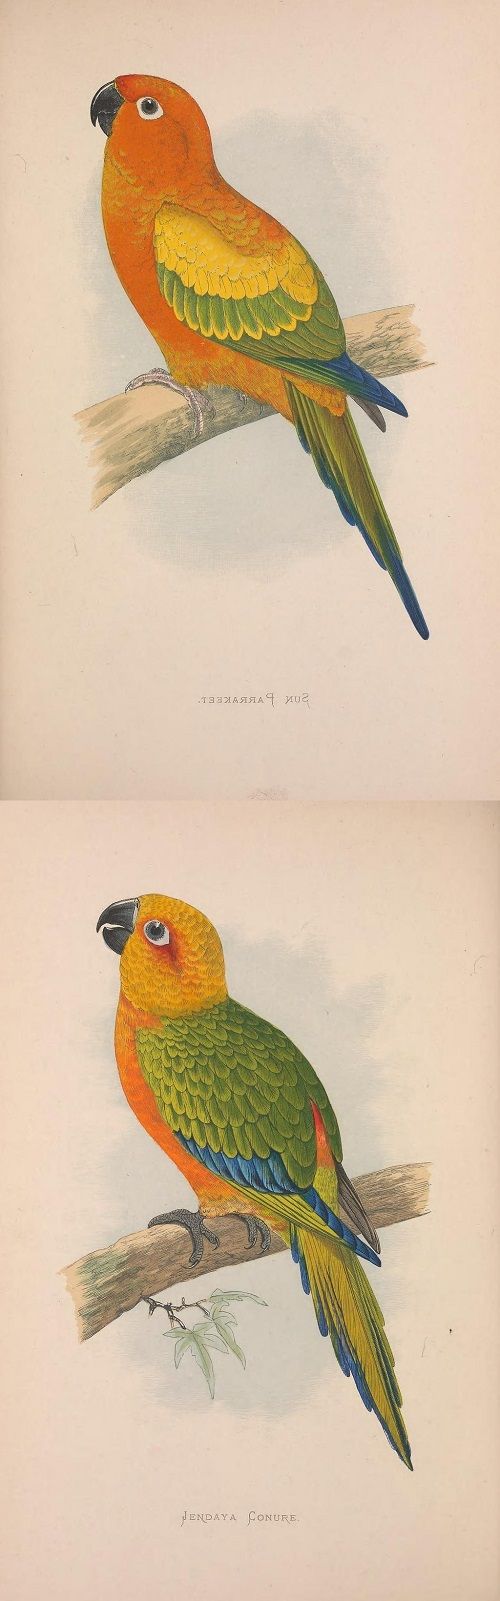 Split vintage illustrations showing the difference between sun and jenday conure parrots